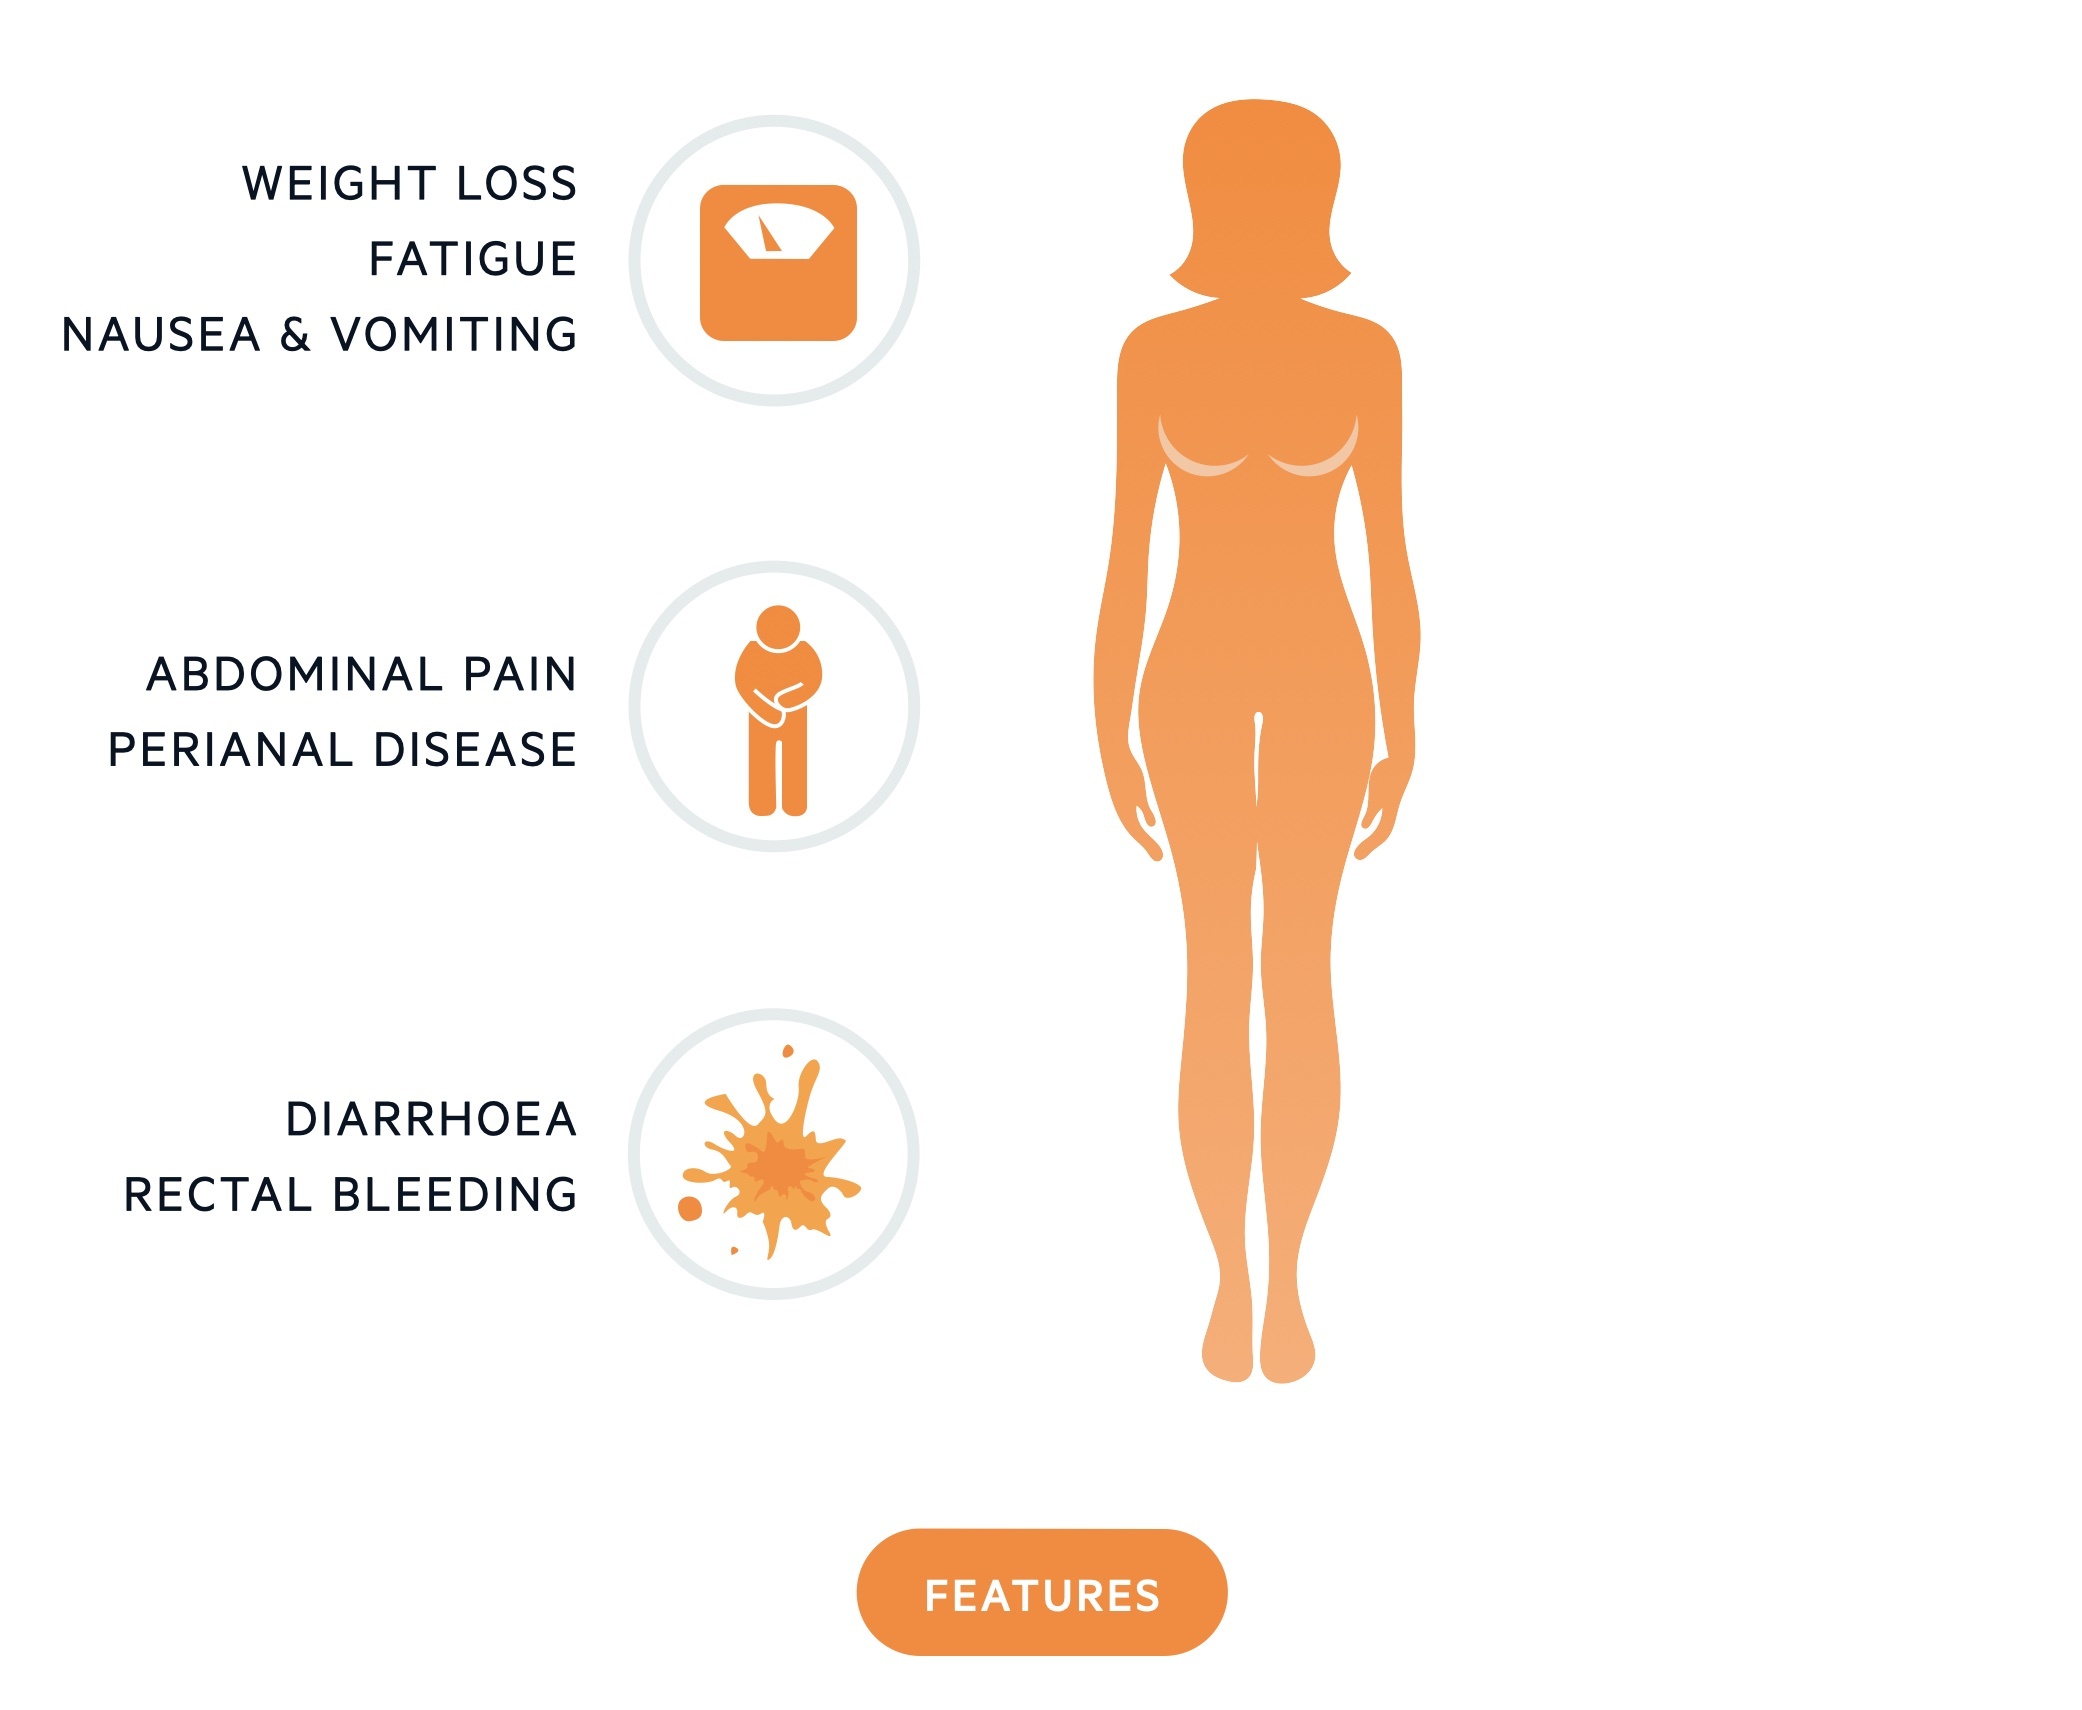 Clinical features of crohns disease (CD)